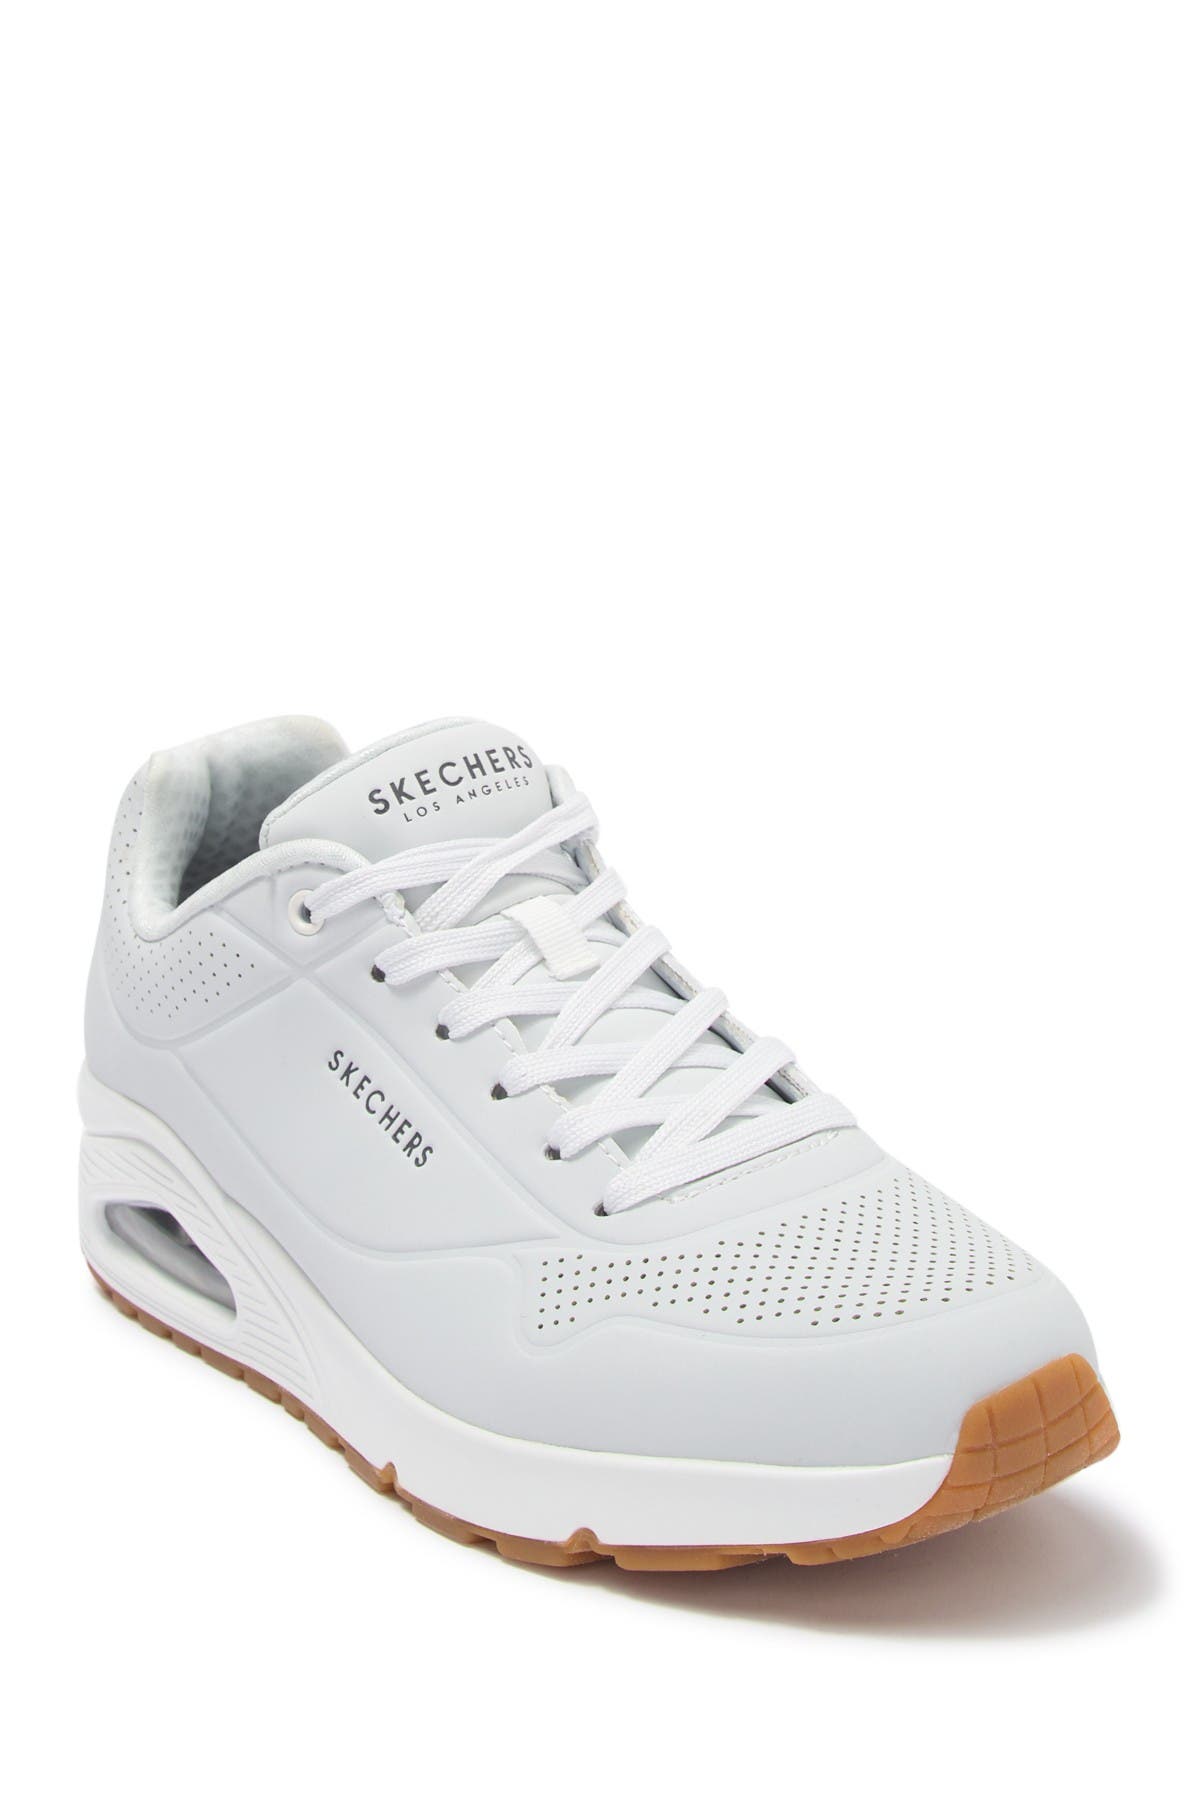 Skechers | Uno Stand On Air Sneaker 